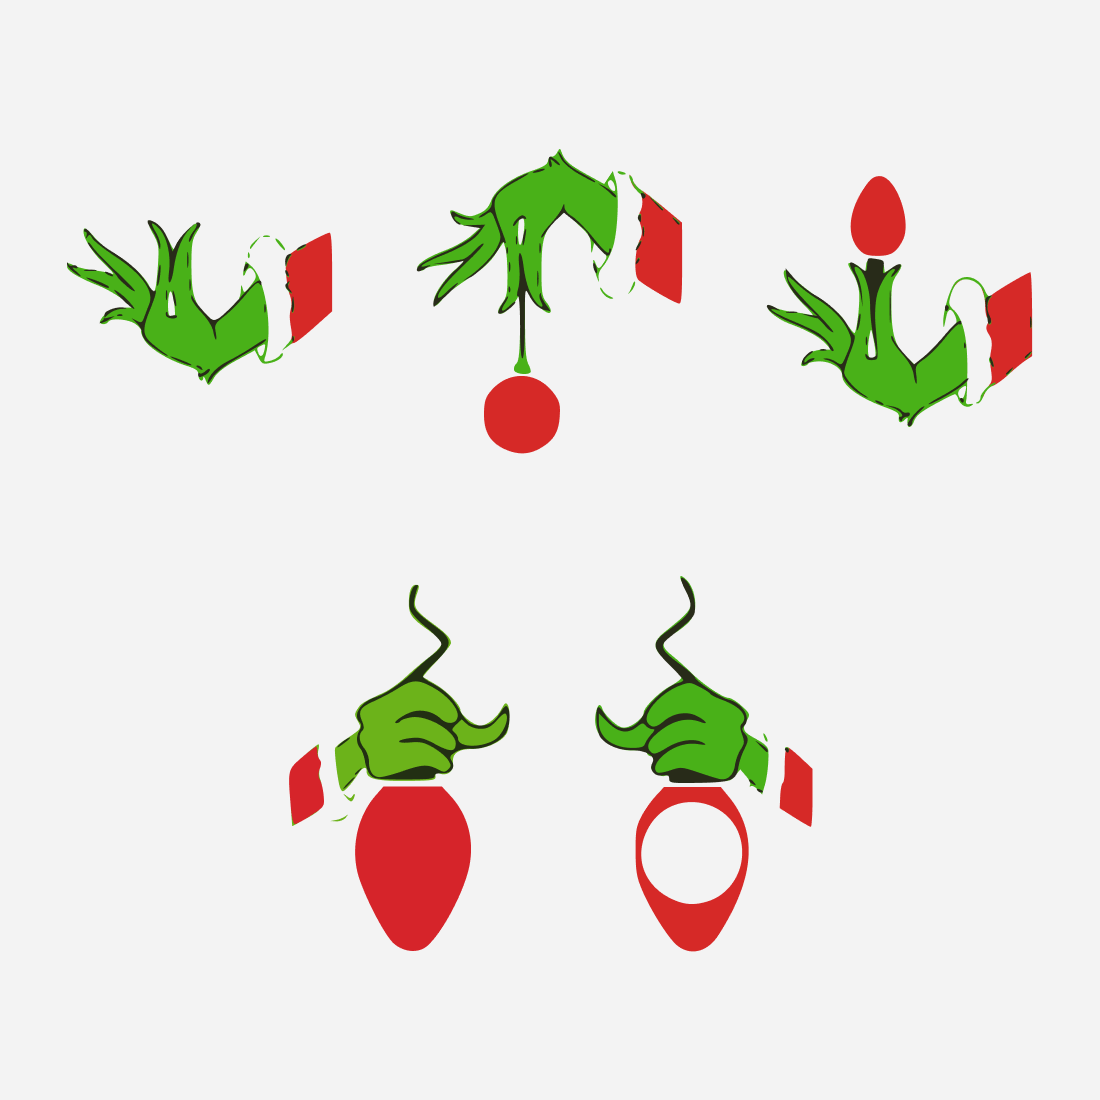 Grinch's green hands hold red Christmas toys in a funny way.